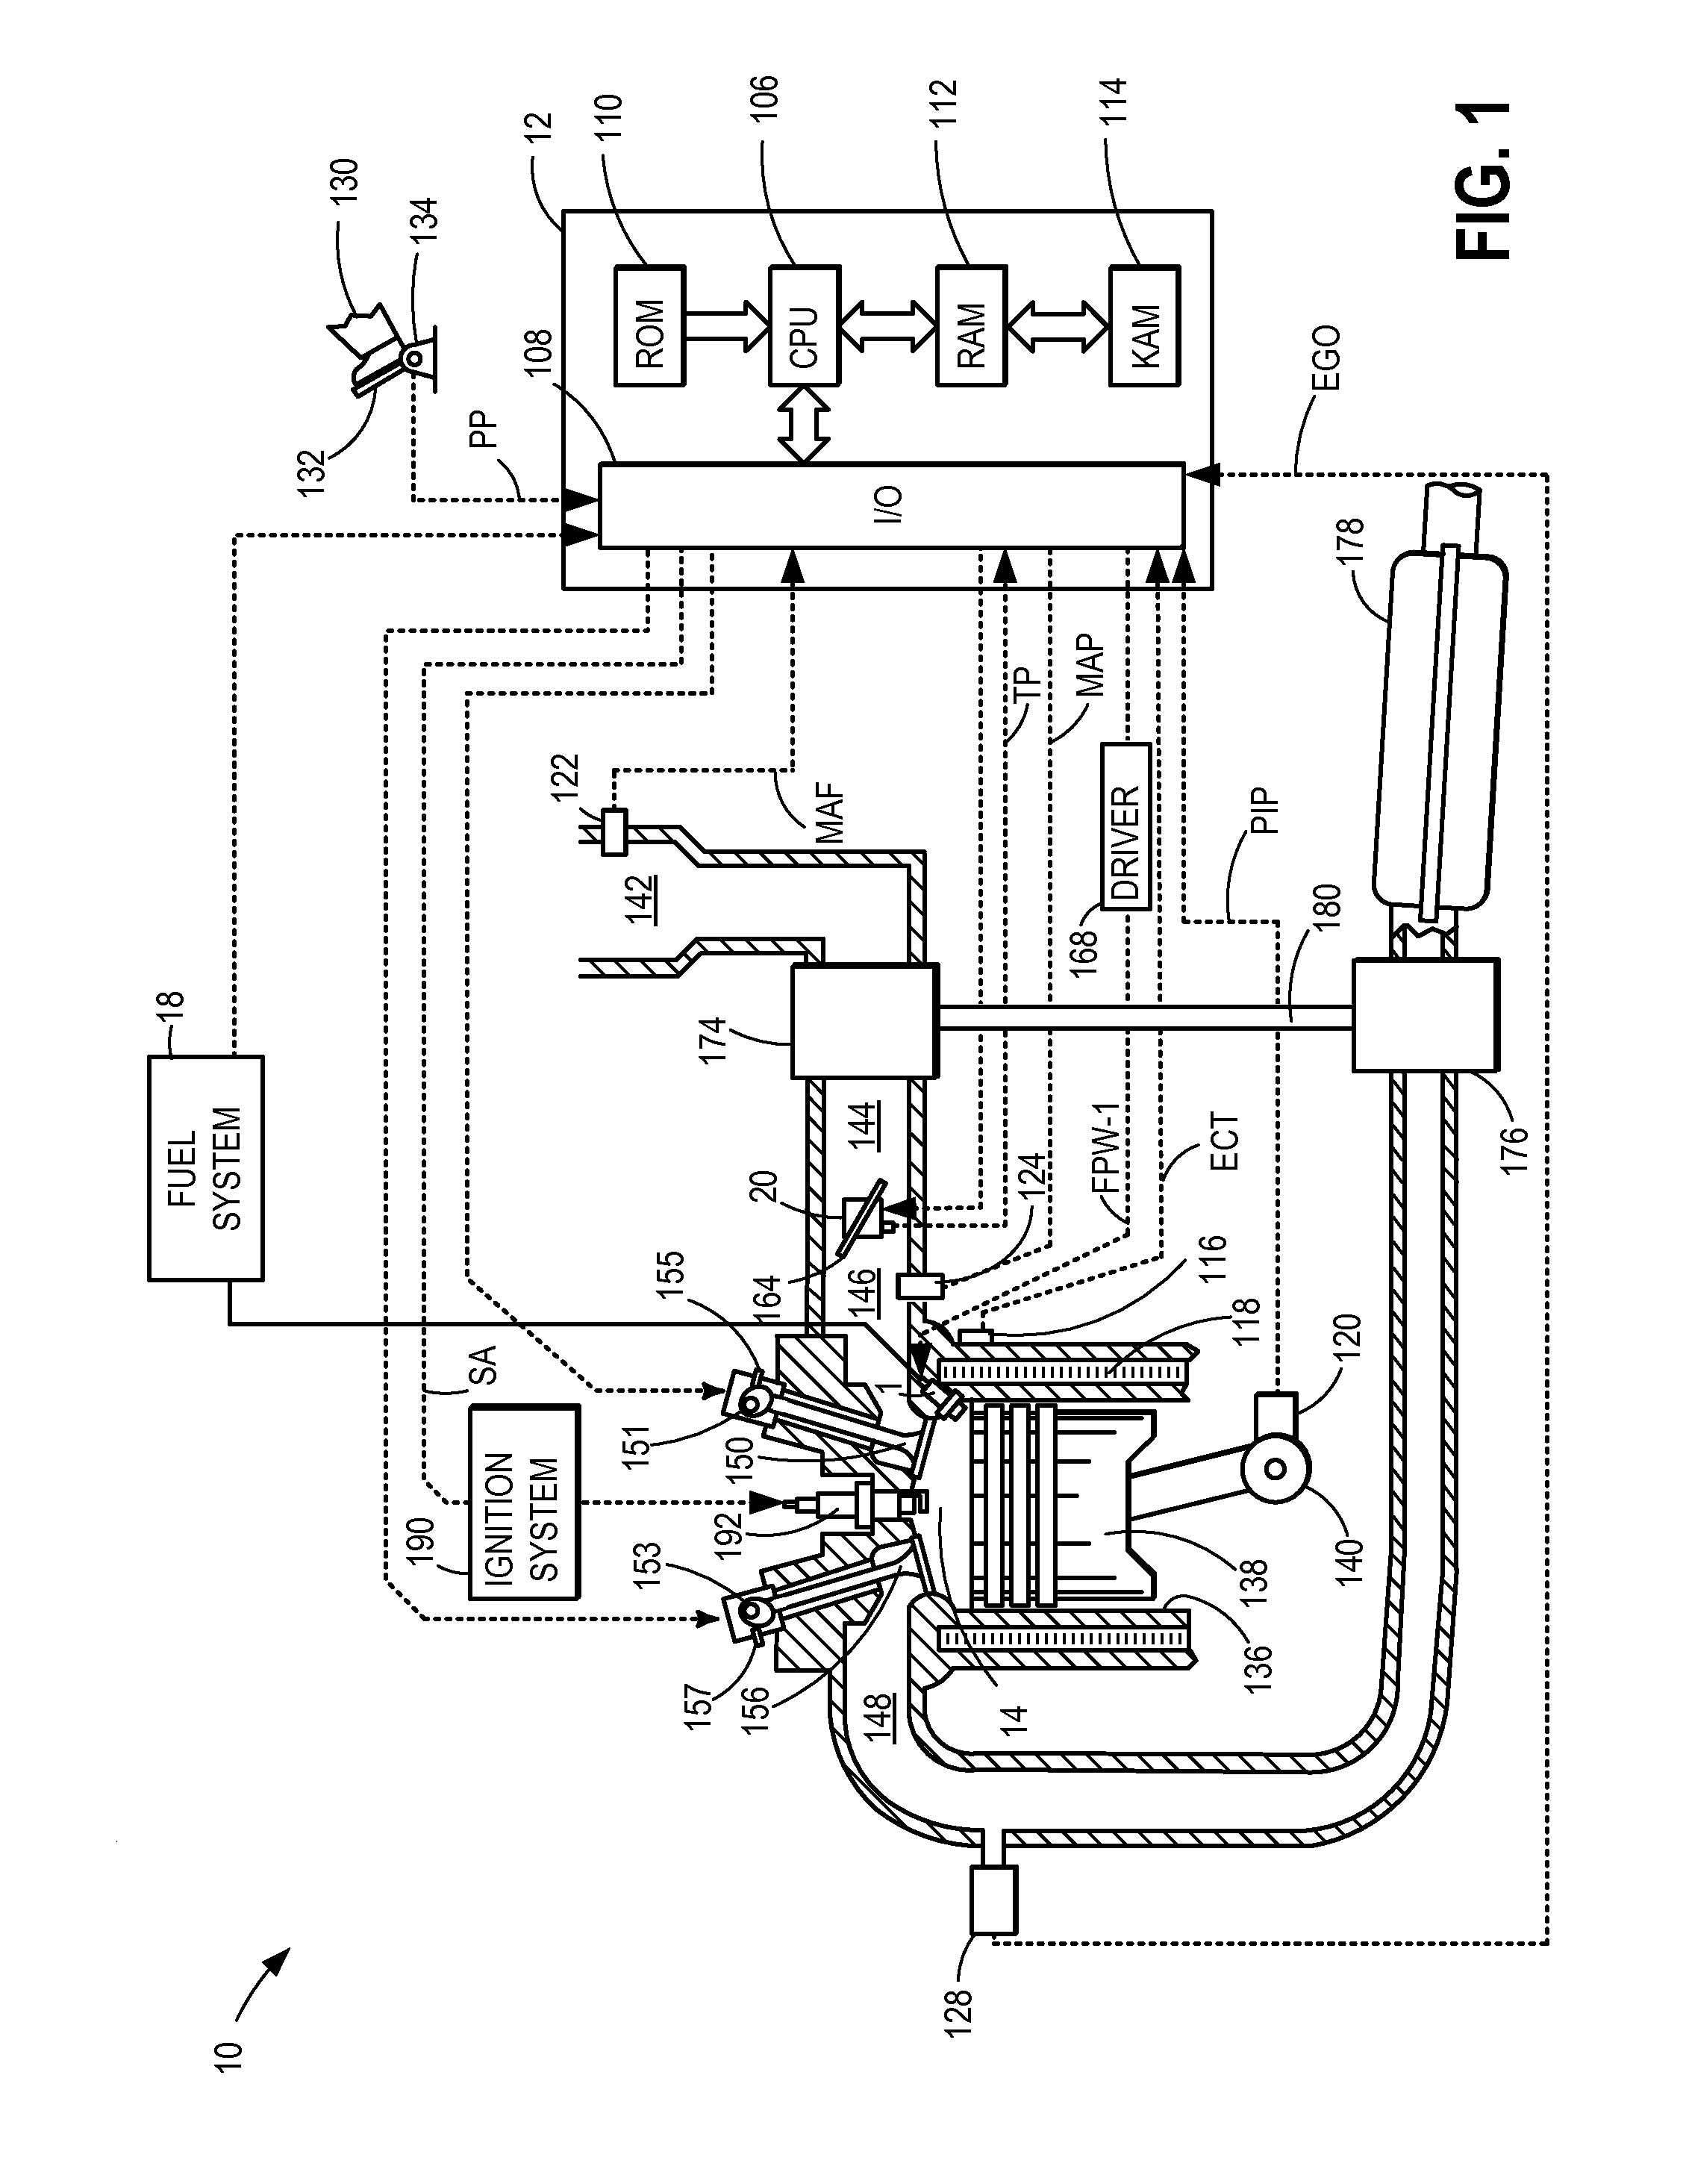 Applied-ignition internal combustion engine with catalytically coated injection device, and method for operating an internal combustion engine of said type